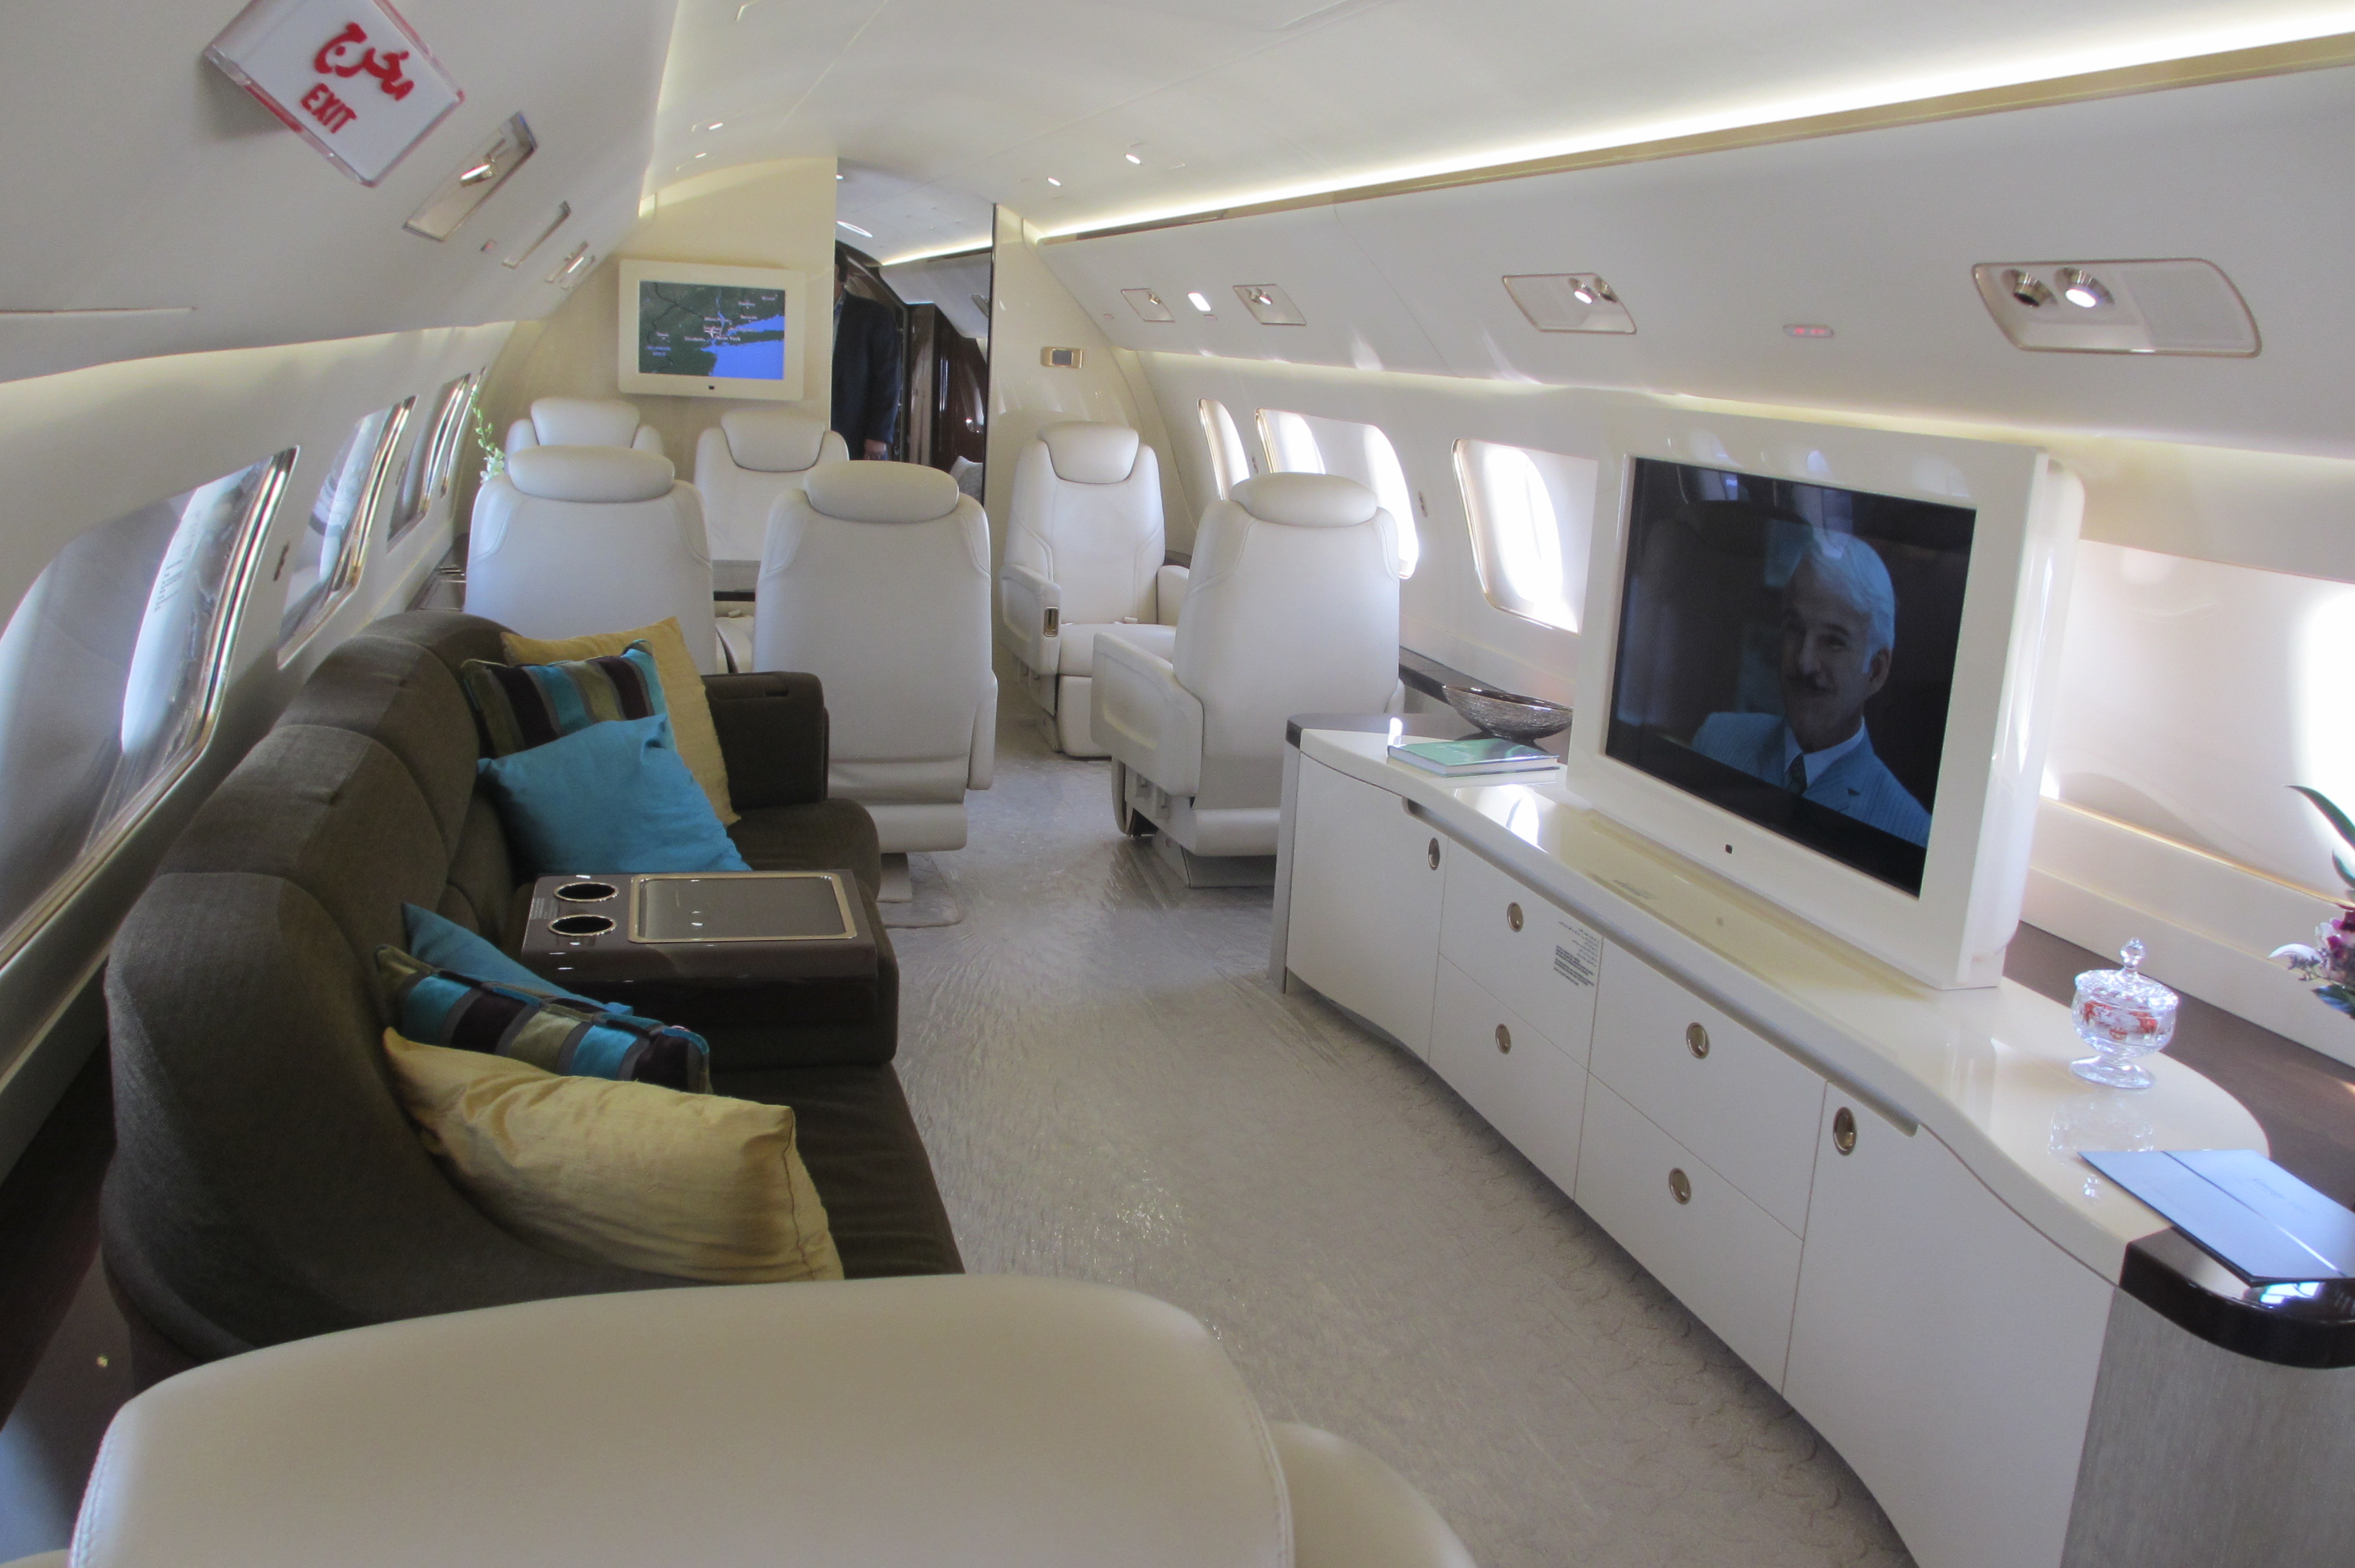 File:Embraer Lineage 1000 interior living room.jpg - Wikimedia Commons